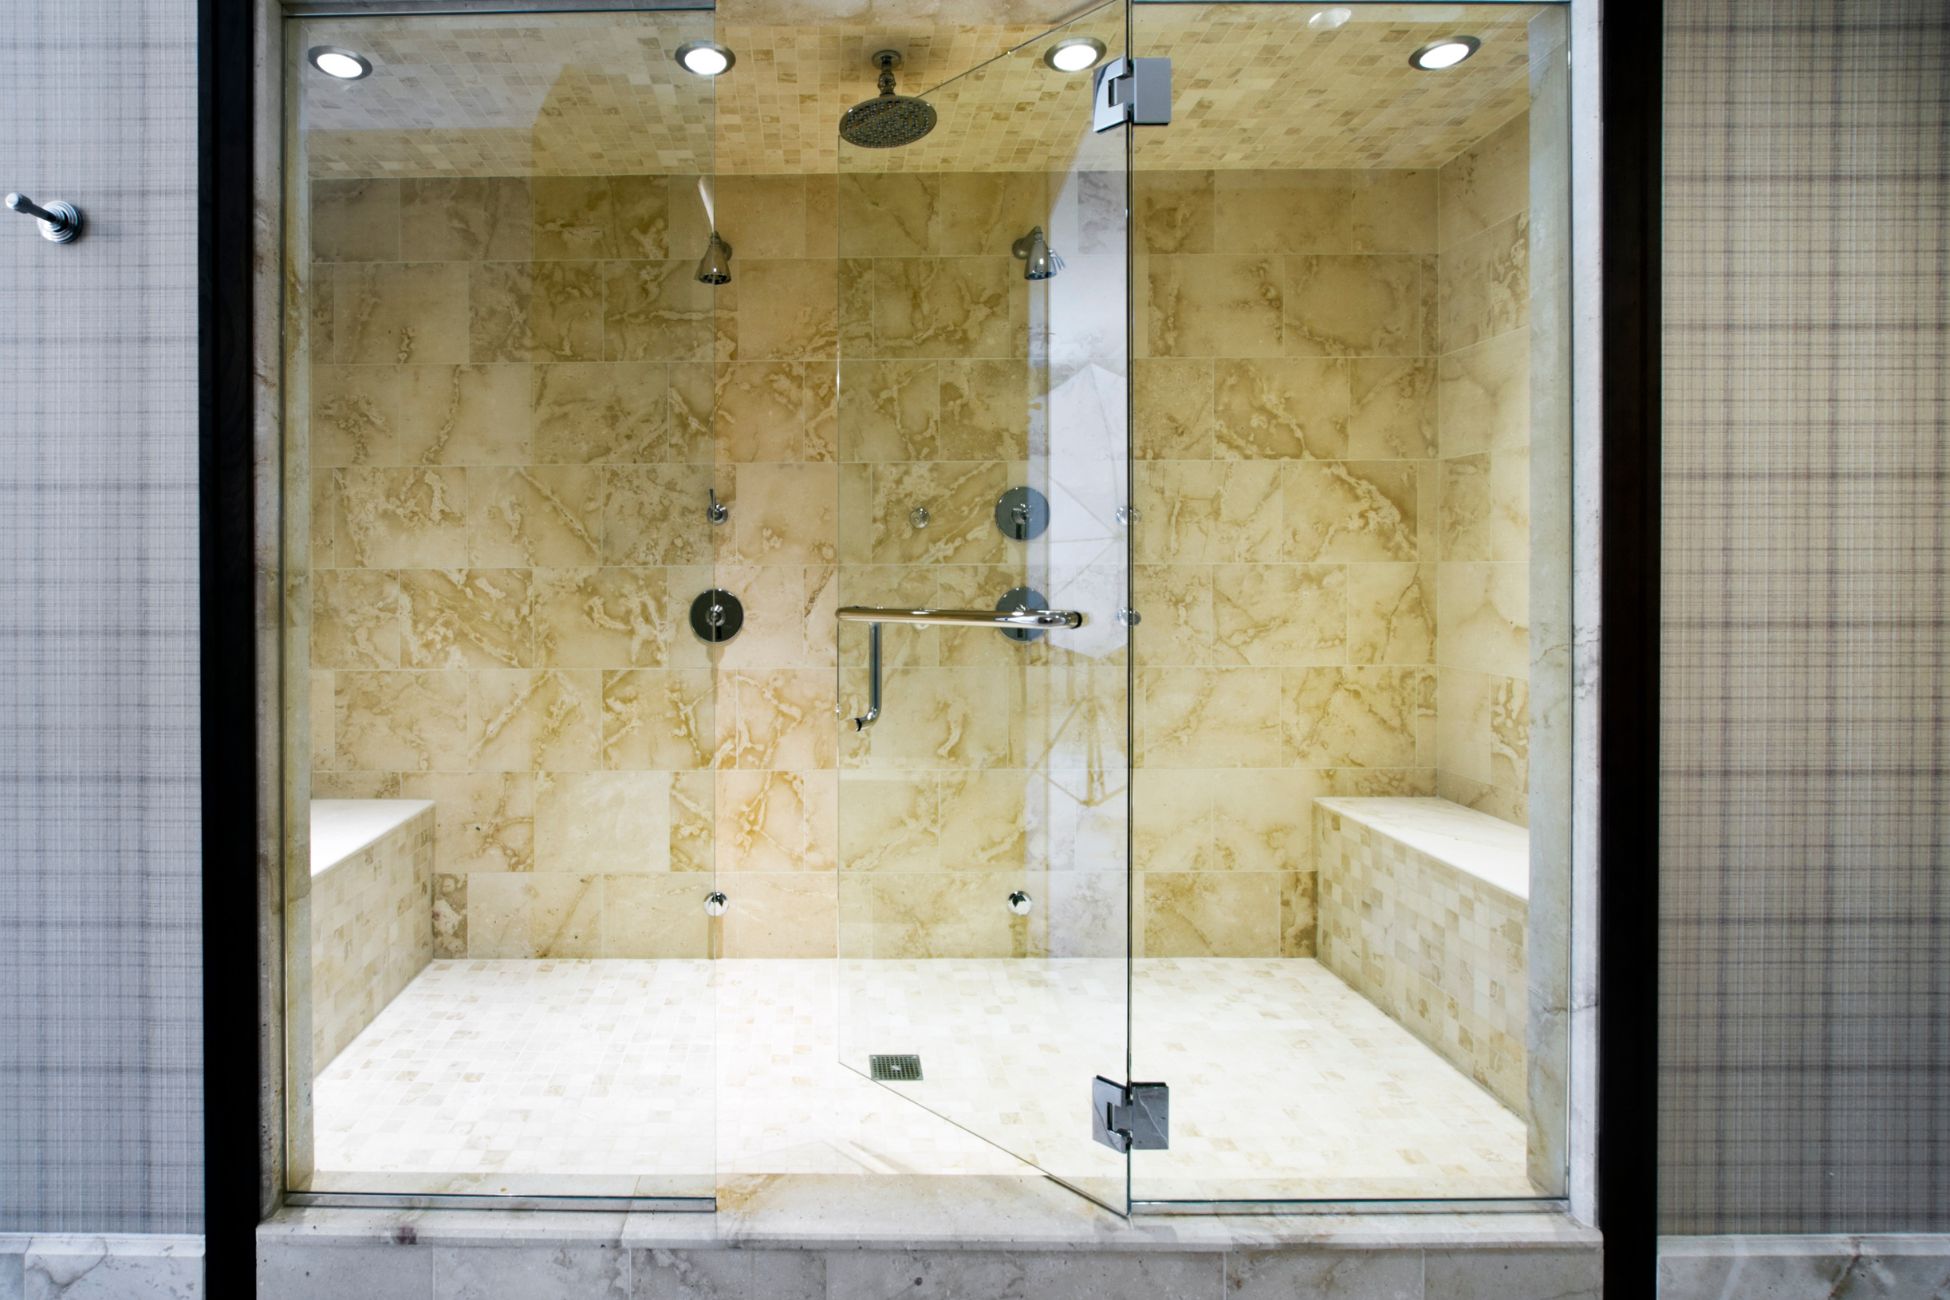 Spacious waterfall shower with cream wall tiles and white flooring